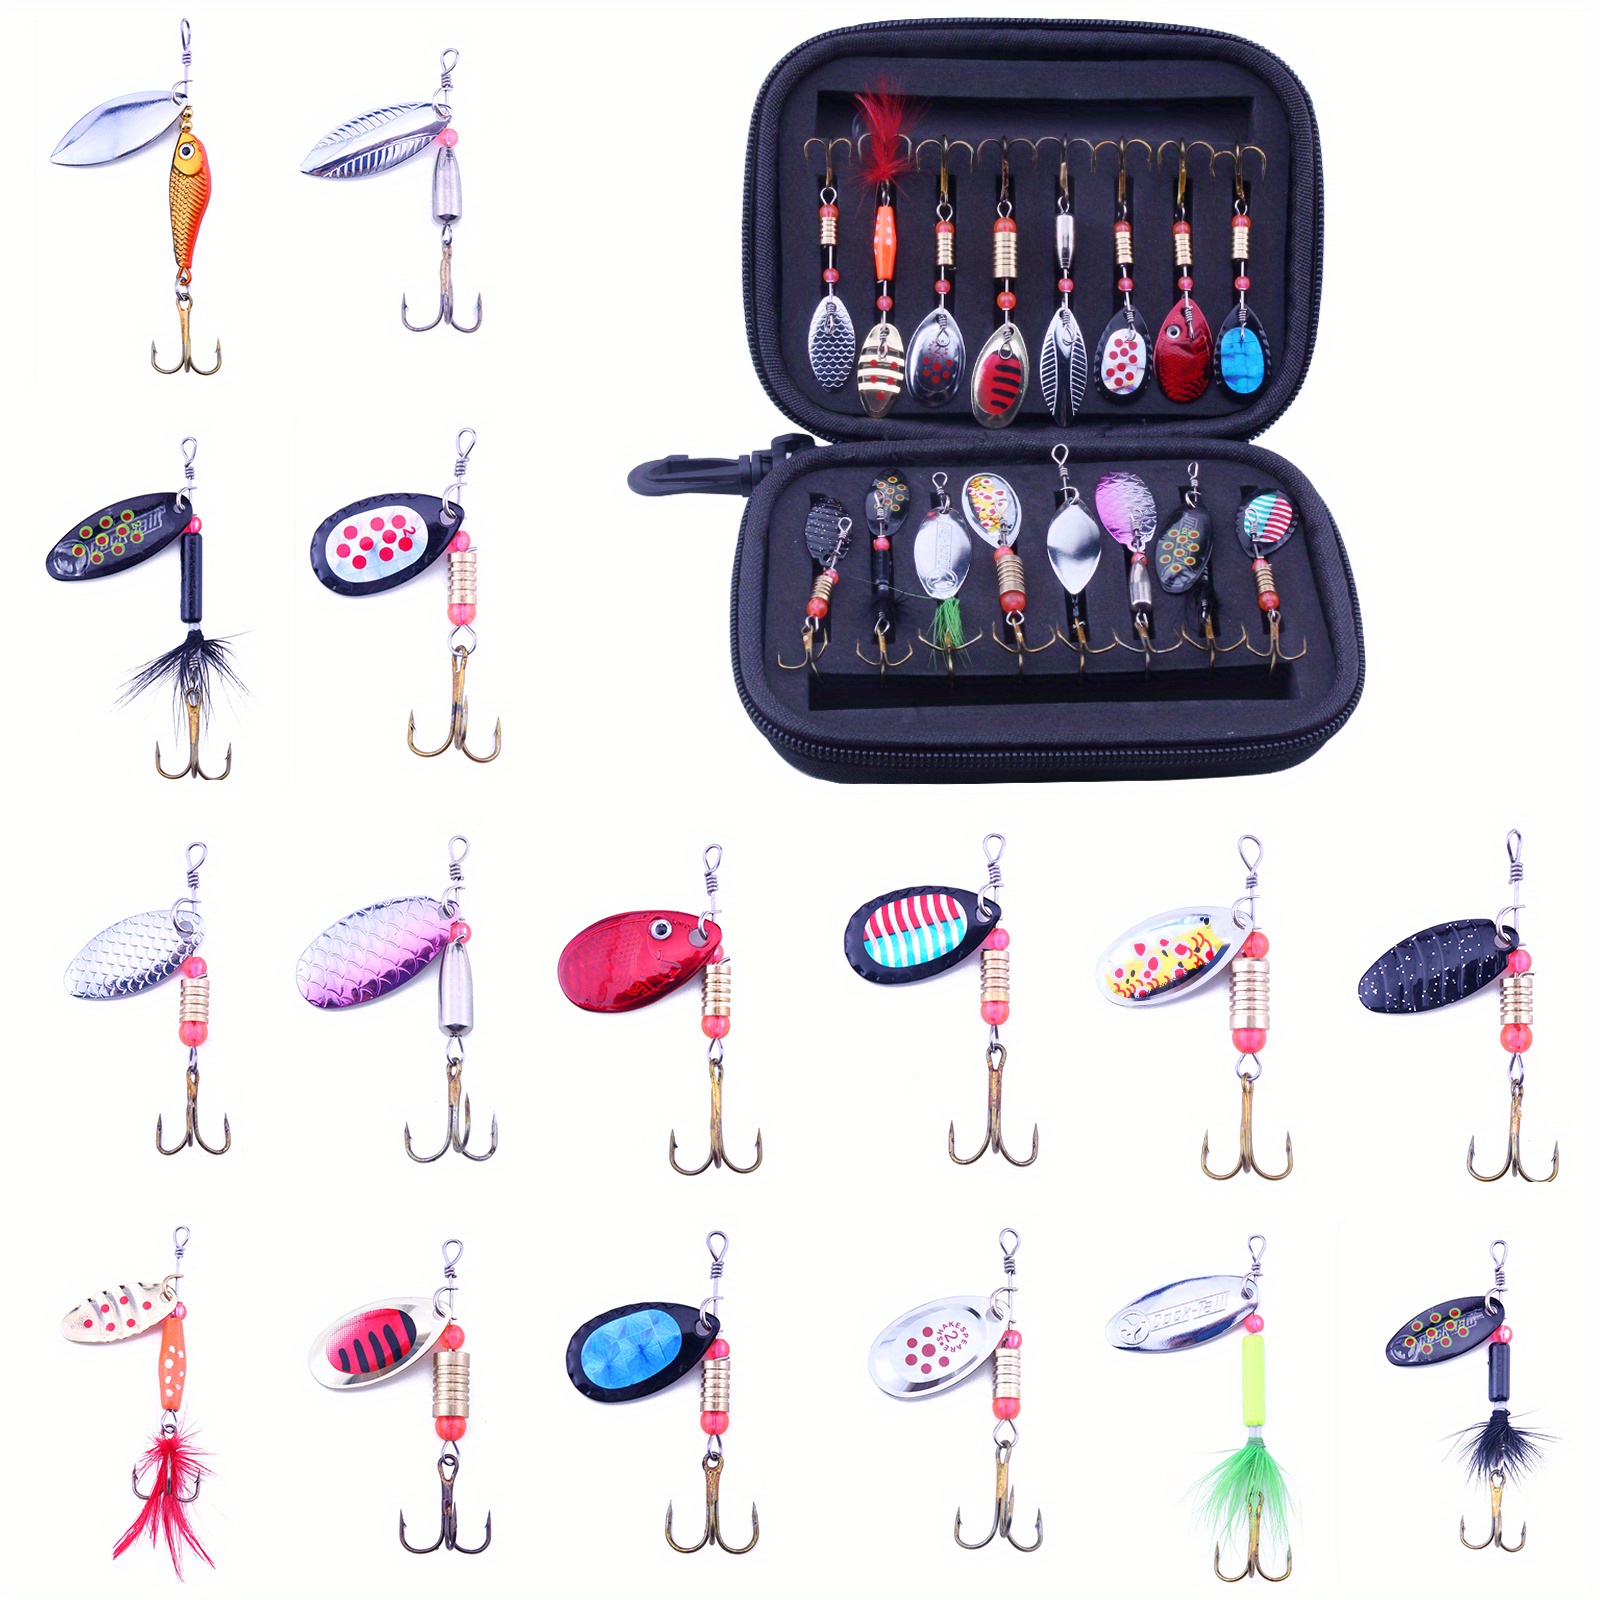 Rooster Tail Fishing Lures,16 Spinner Baits,Fishing Lures for Freshwater, Fishing Spoon,Trout Lures,Bass Lures,Spinners Fishing Lure,Hard Metal  Spinner Baits kit with Carry Bag, Spinners & Spinnerbaits -  Canada